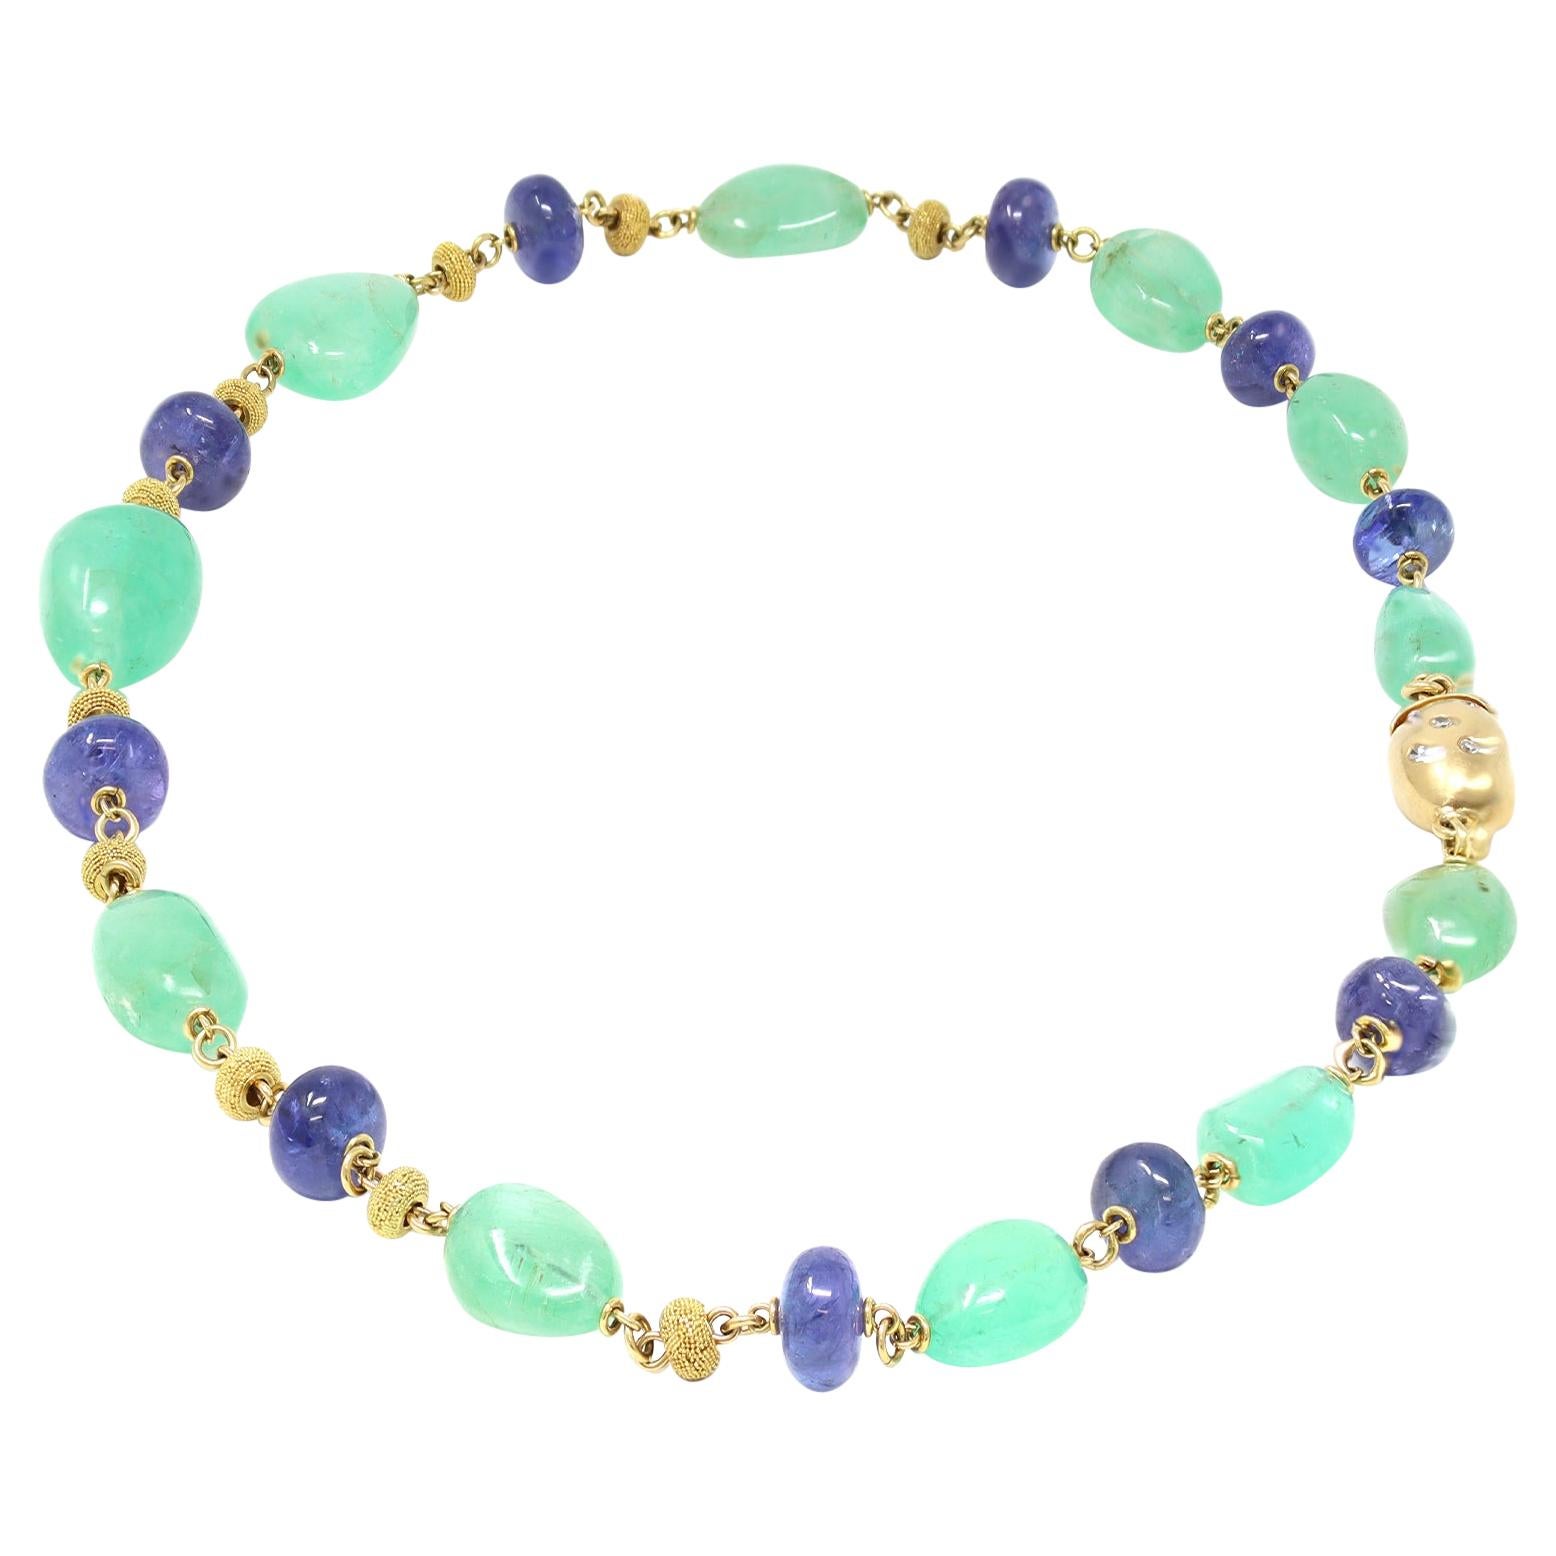 Emerald and Tanzanite Bead Necklace by Rosaria Varra in 18 Karat For Sale